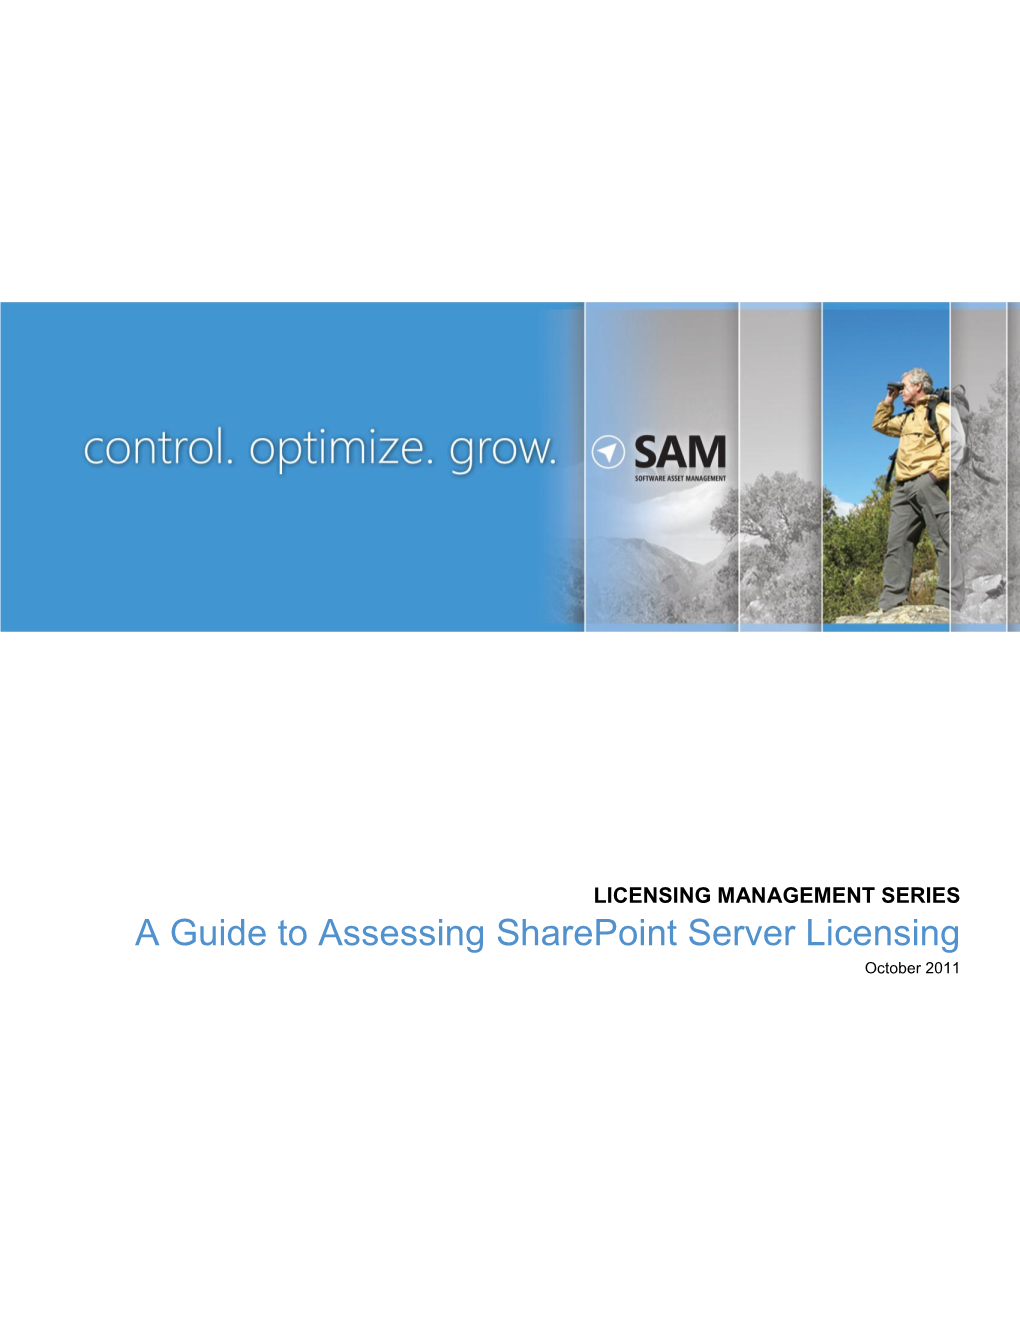 A Guide to Assessing Sharepoint Server Licensing October 2011